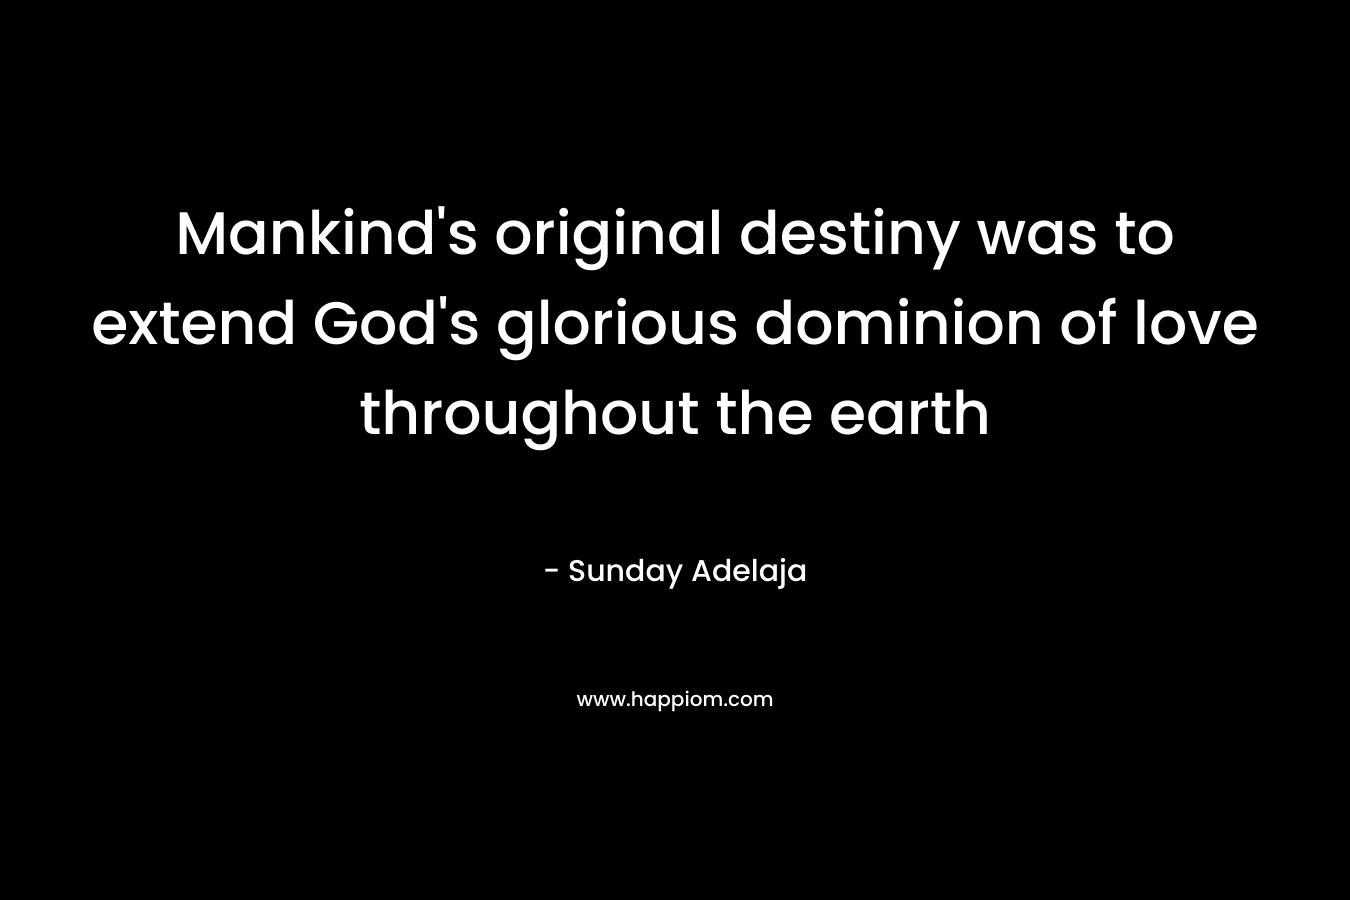 Mankind’s original destiny was to extend God’s glorious dominion of love throughout the earth – Sunday Adelaja